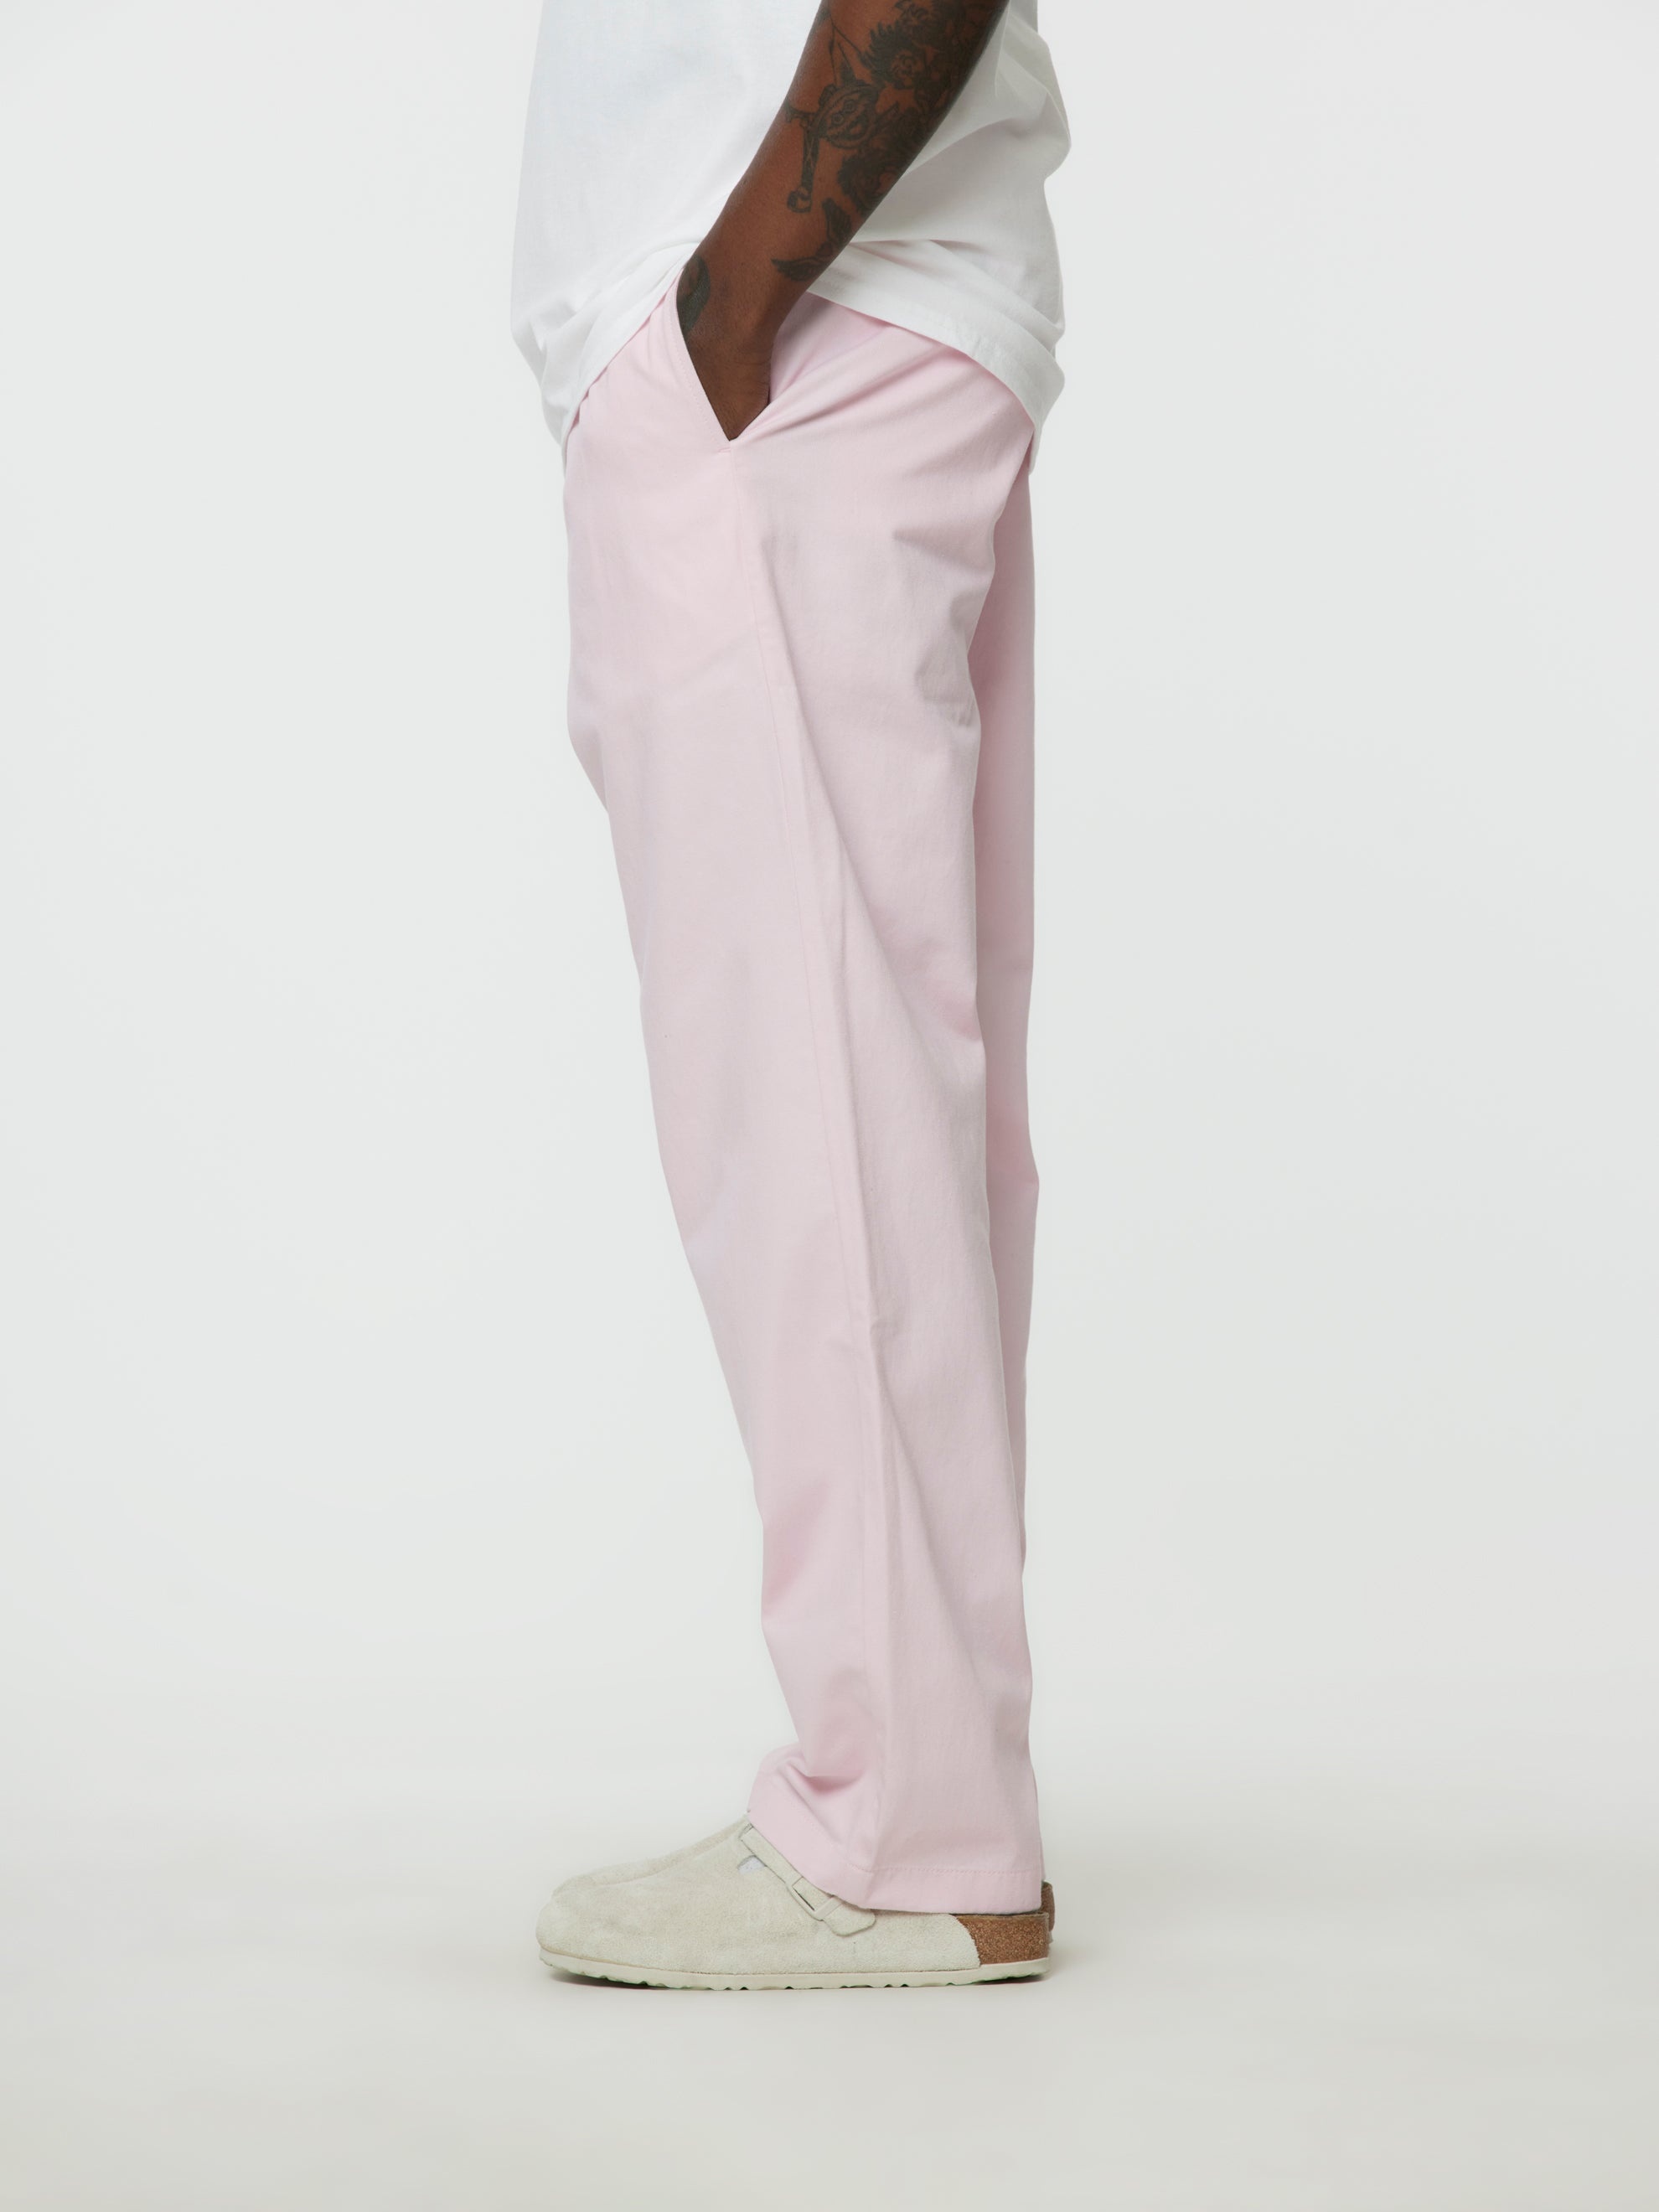 TWILL DOUBLE-PLEAT PANTS (PINK) - 4